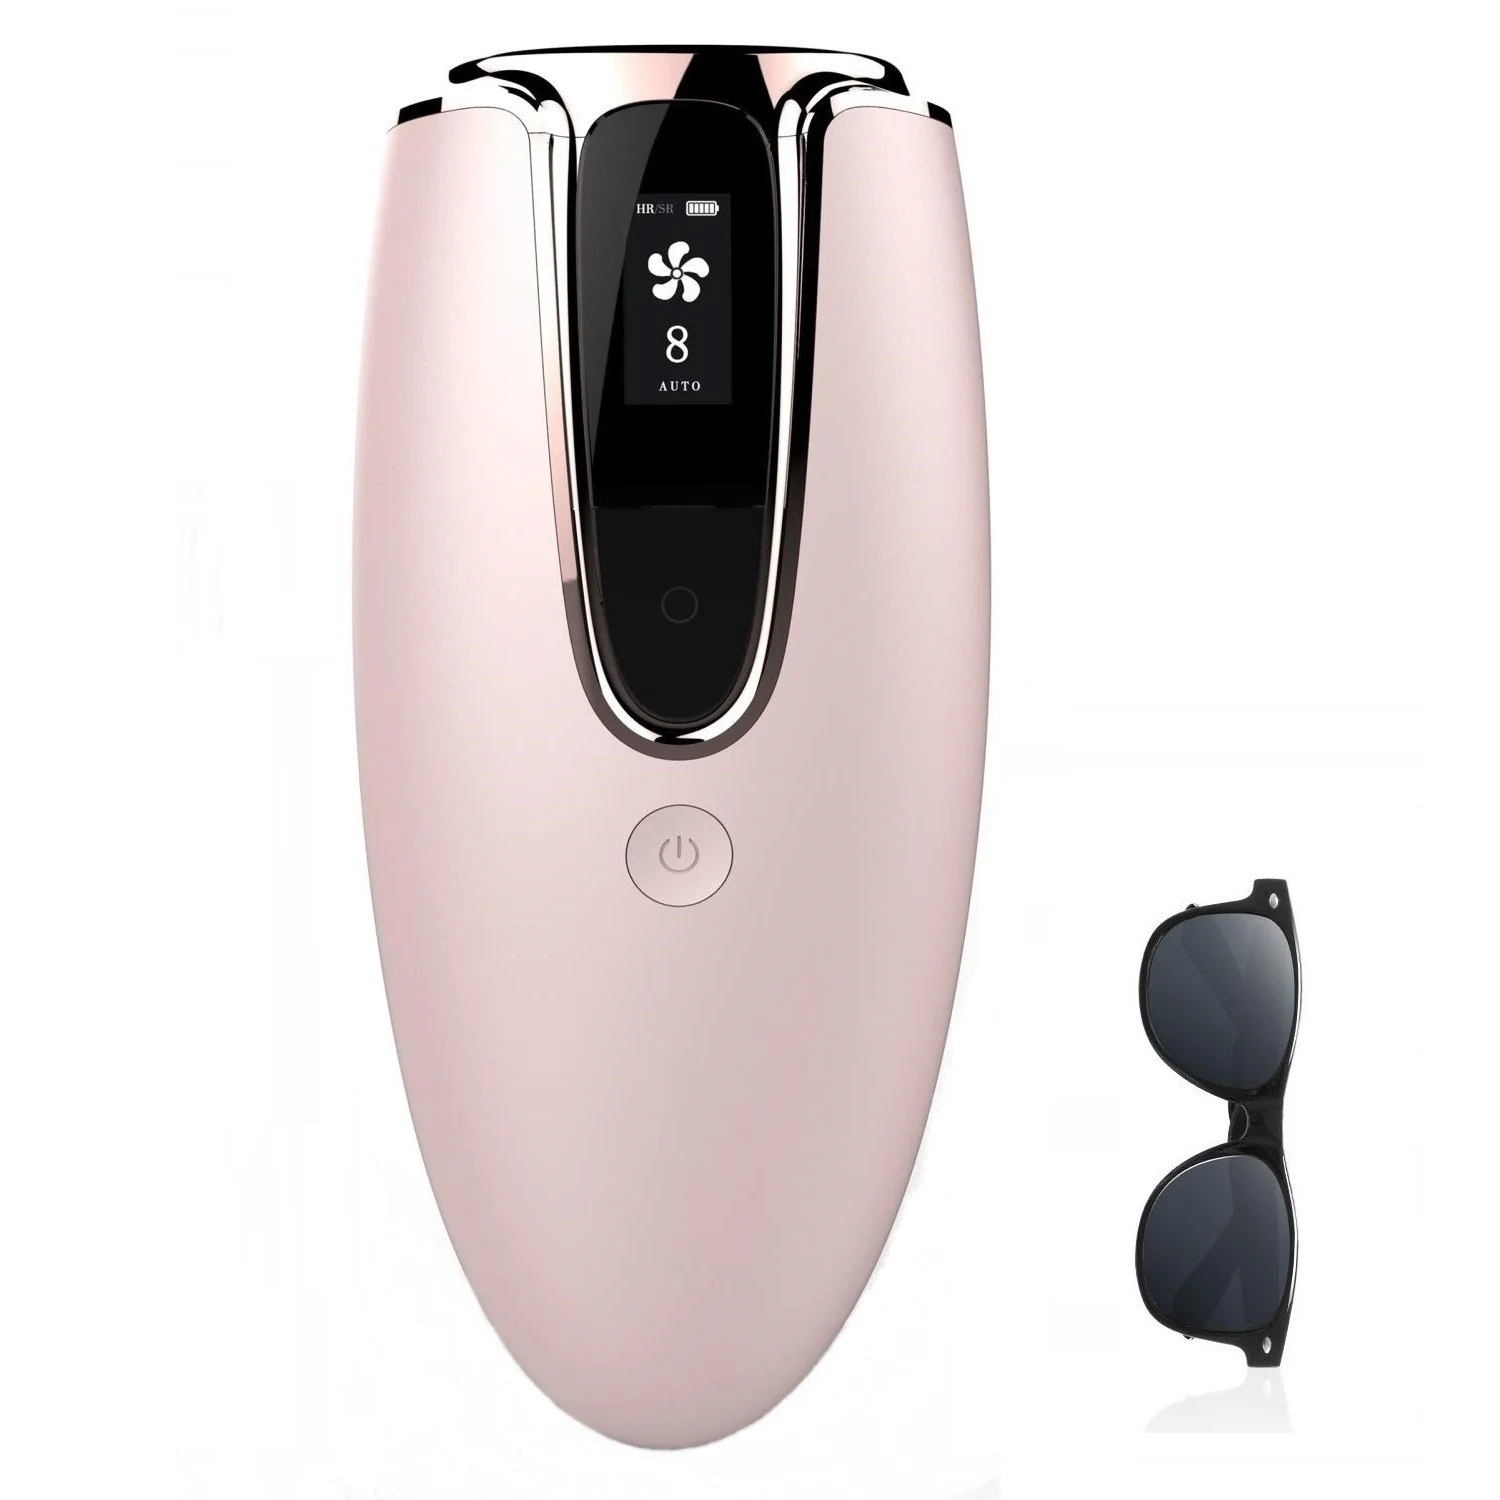 

Hot selling items Dropshipping Professional 500000 flahes ipl handset Permanent Hair Removal Home Use ipl Hair Removal device, White,pink,black